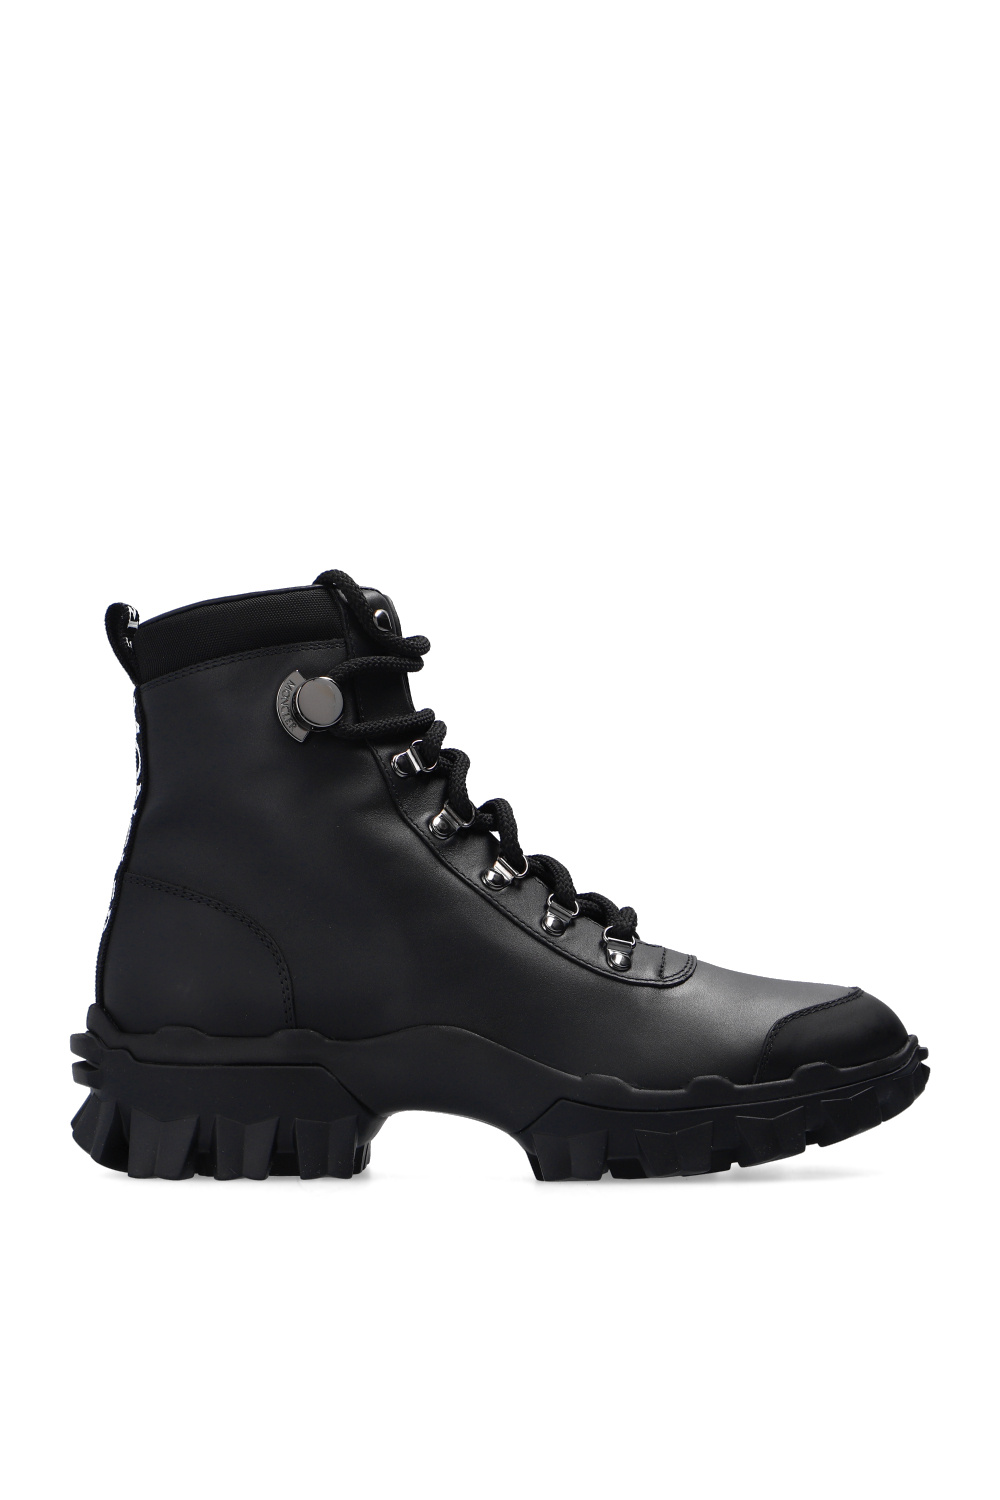 Moncler ‘Helis’ hiking boots